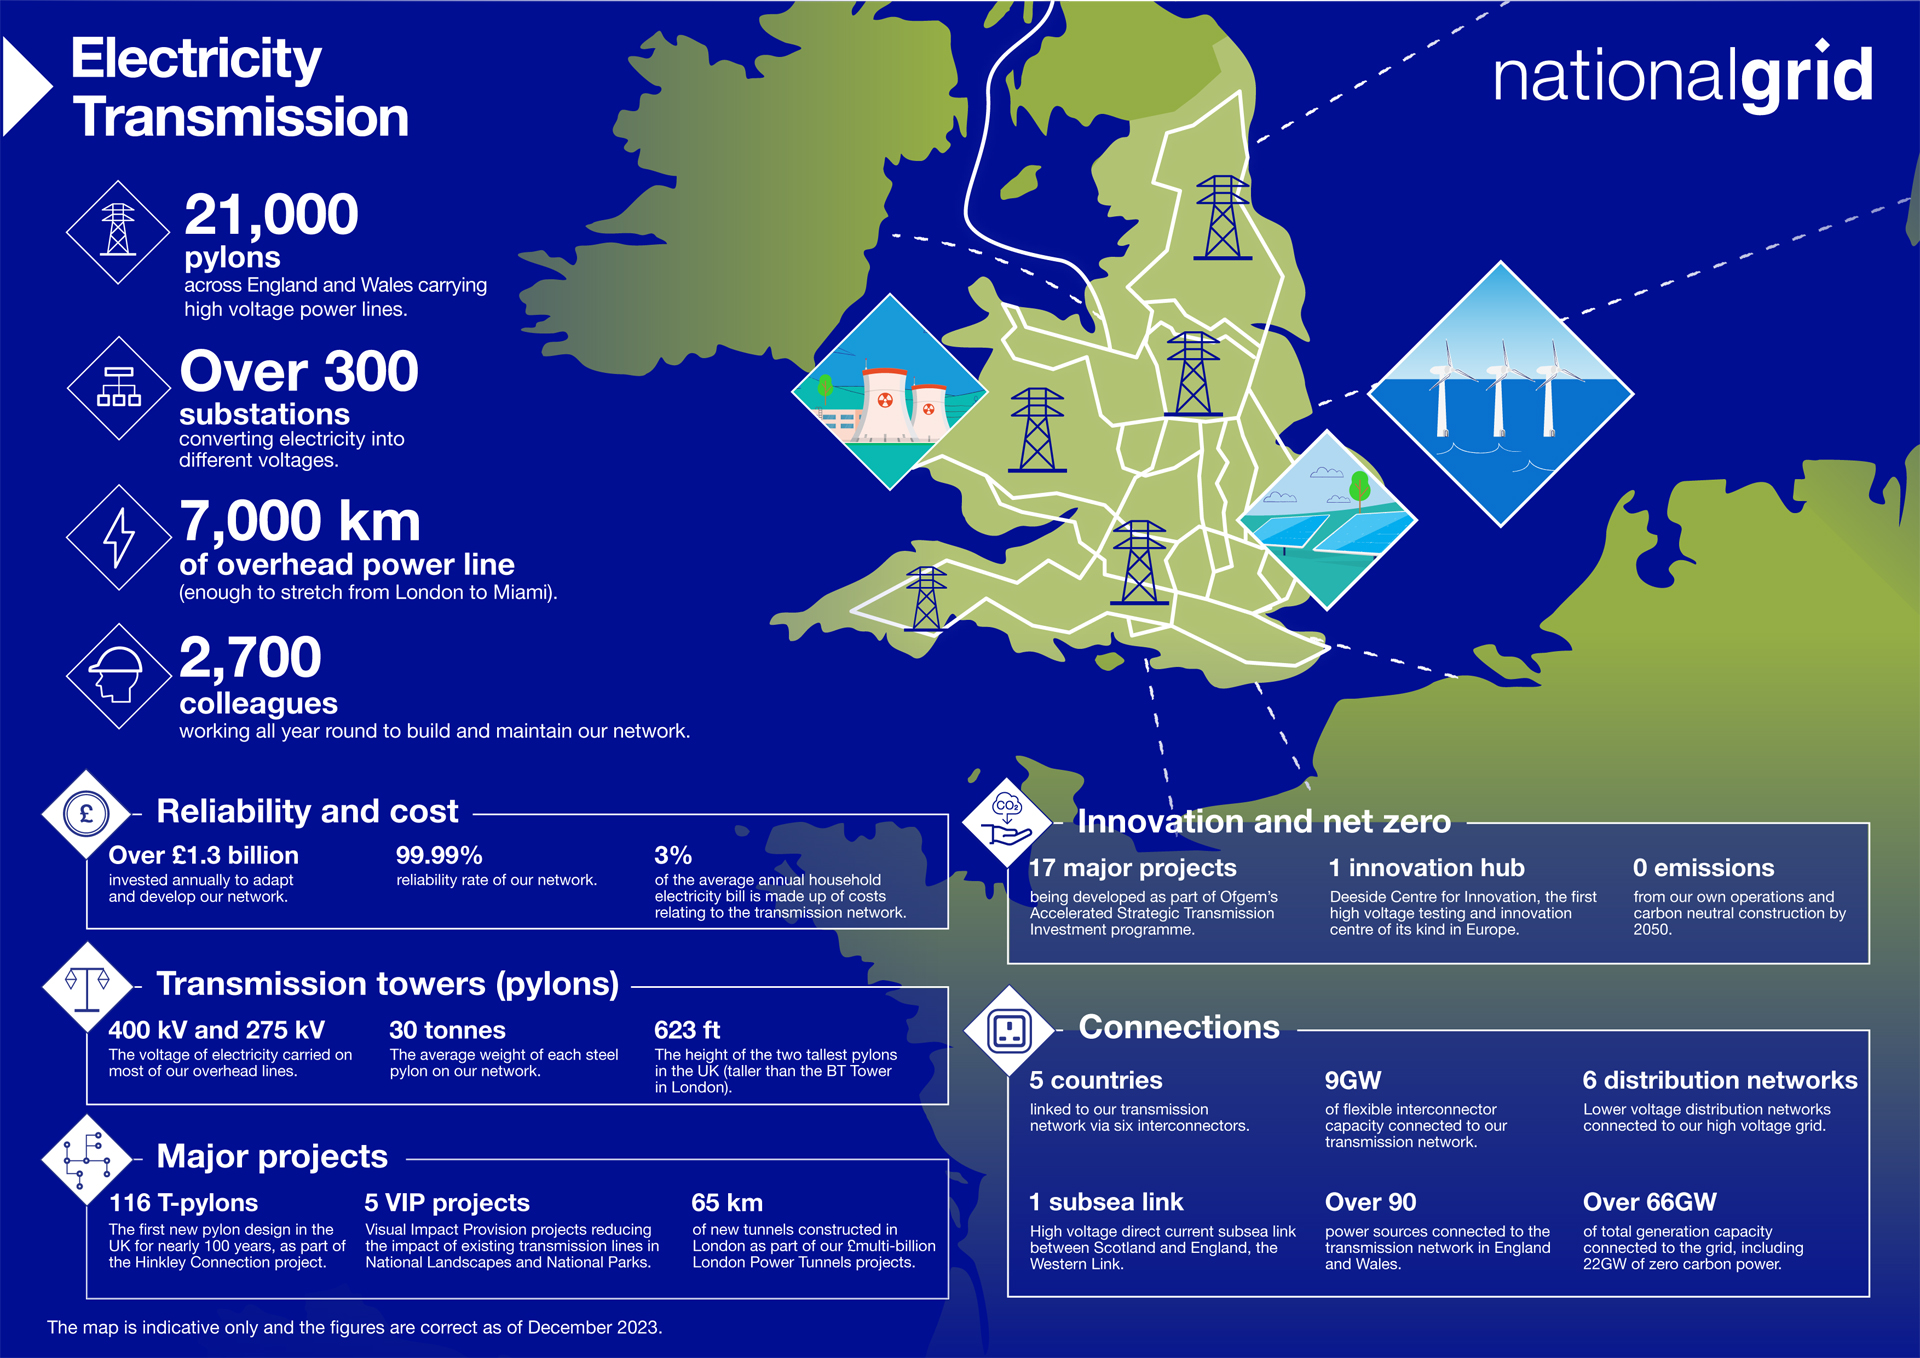 Infographic showing facts and figures from National Grid Electricity Transmission